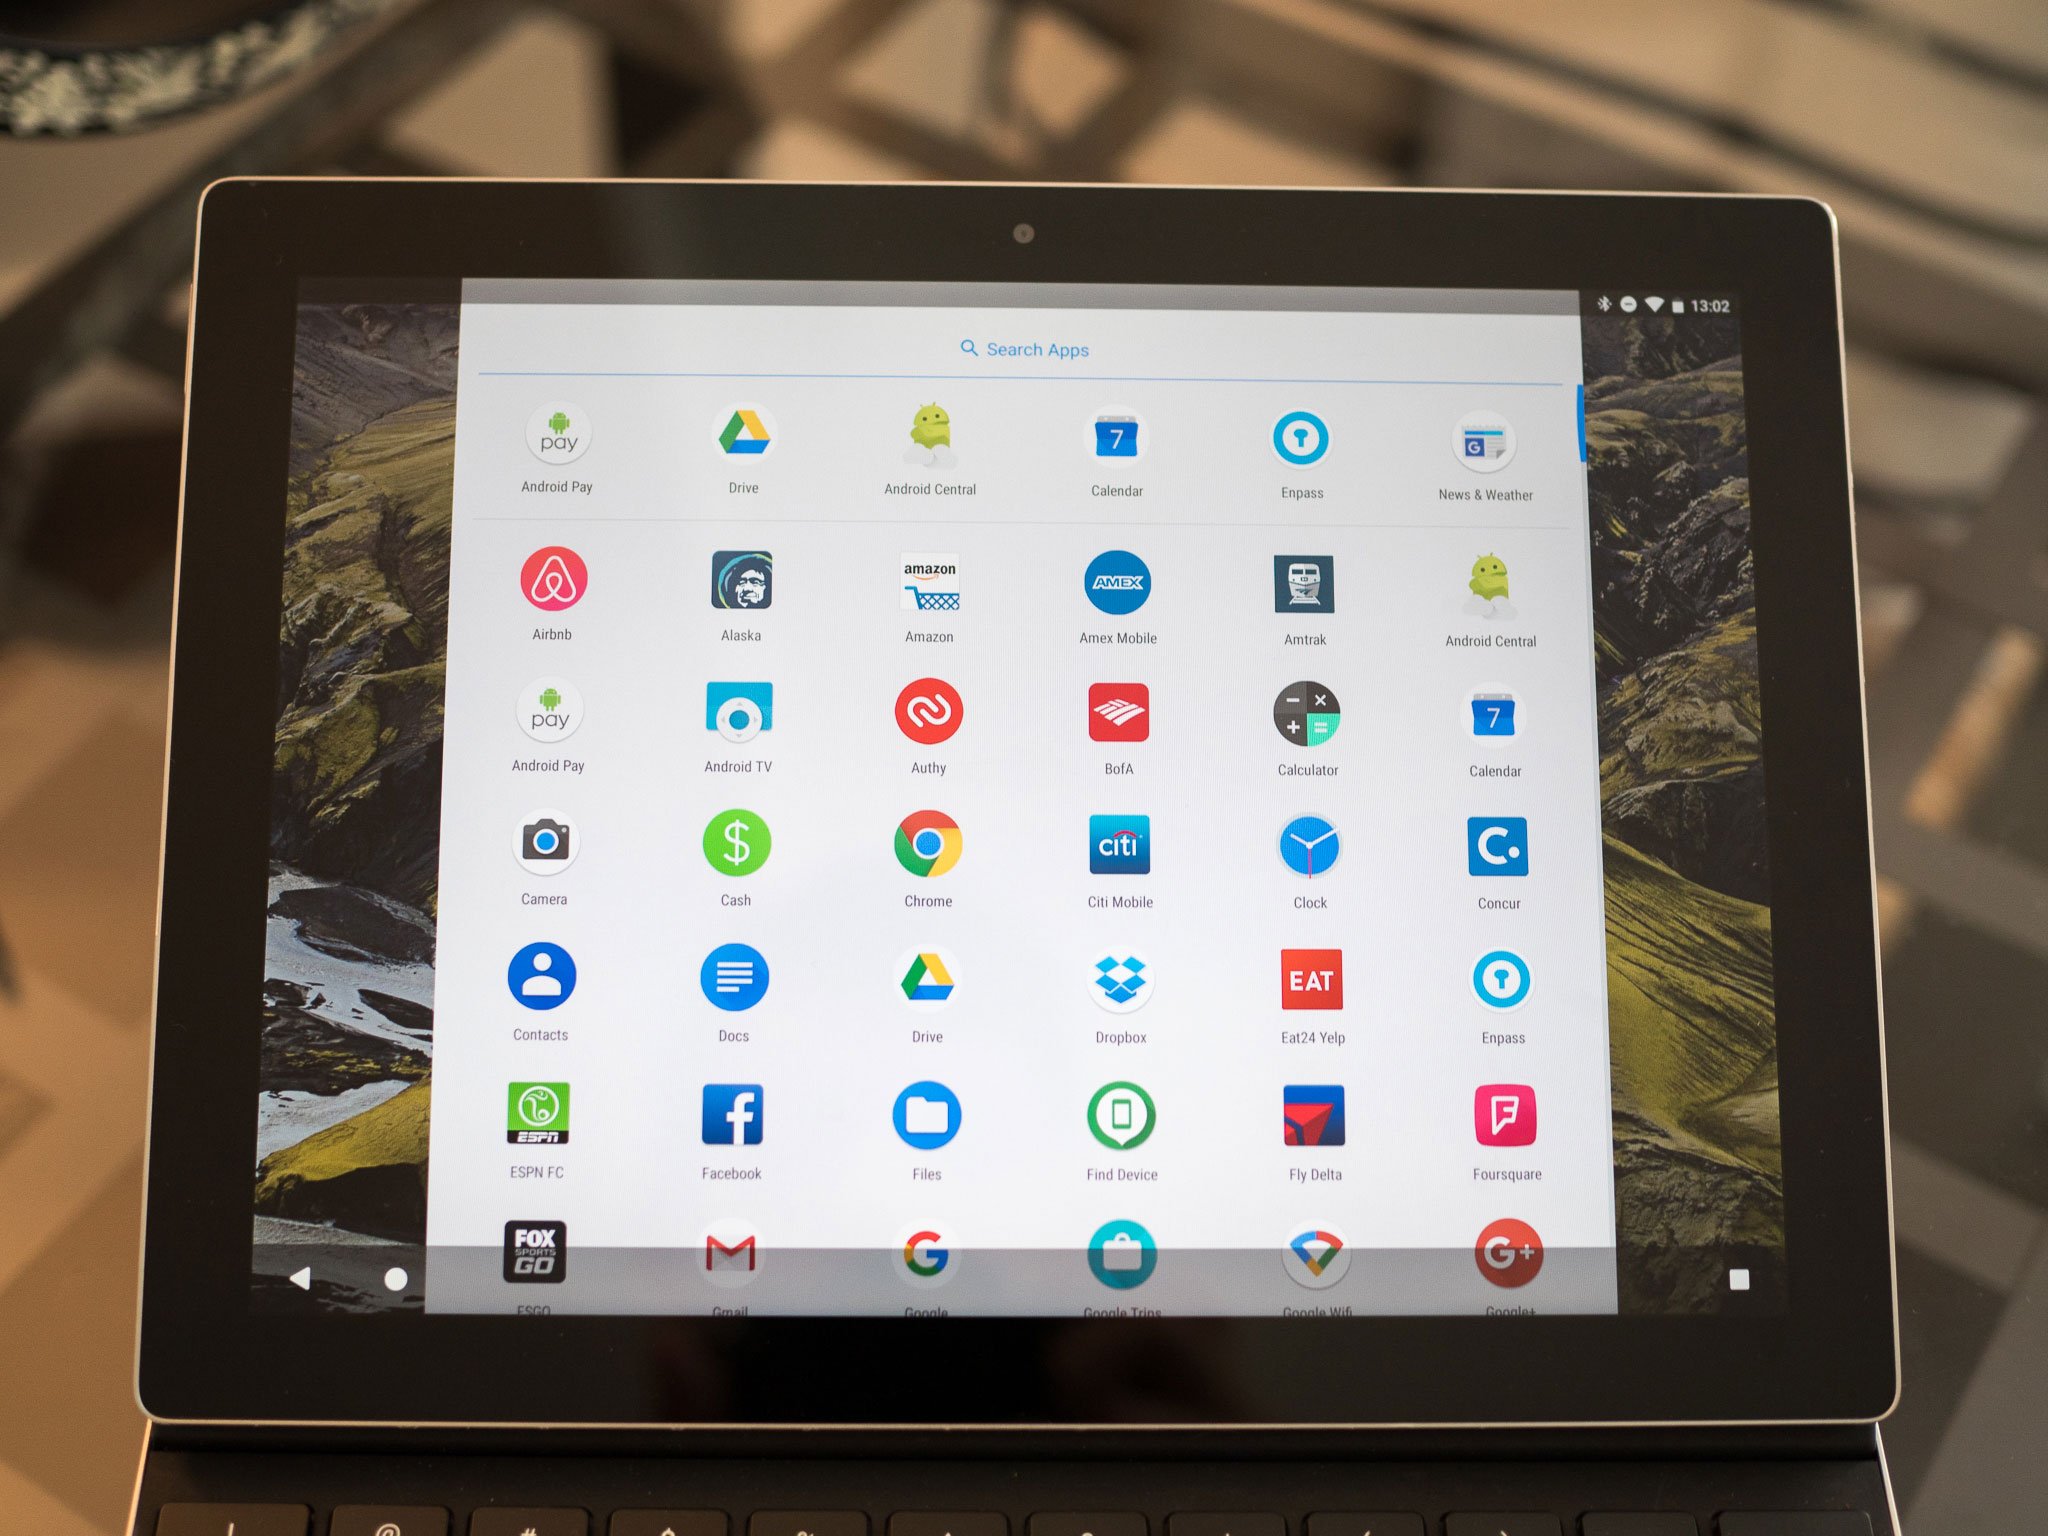 Android O on Pixel C